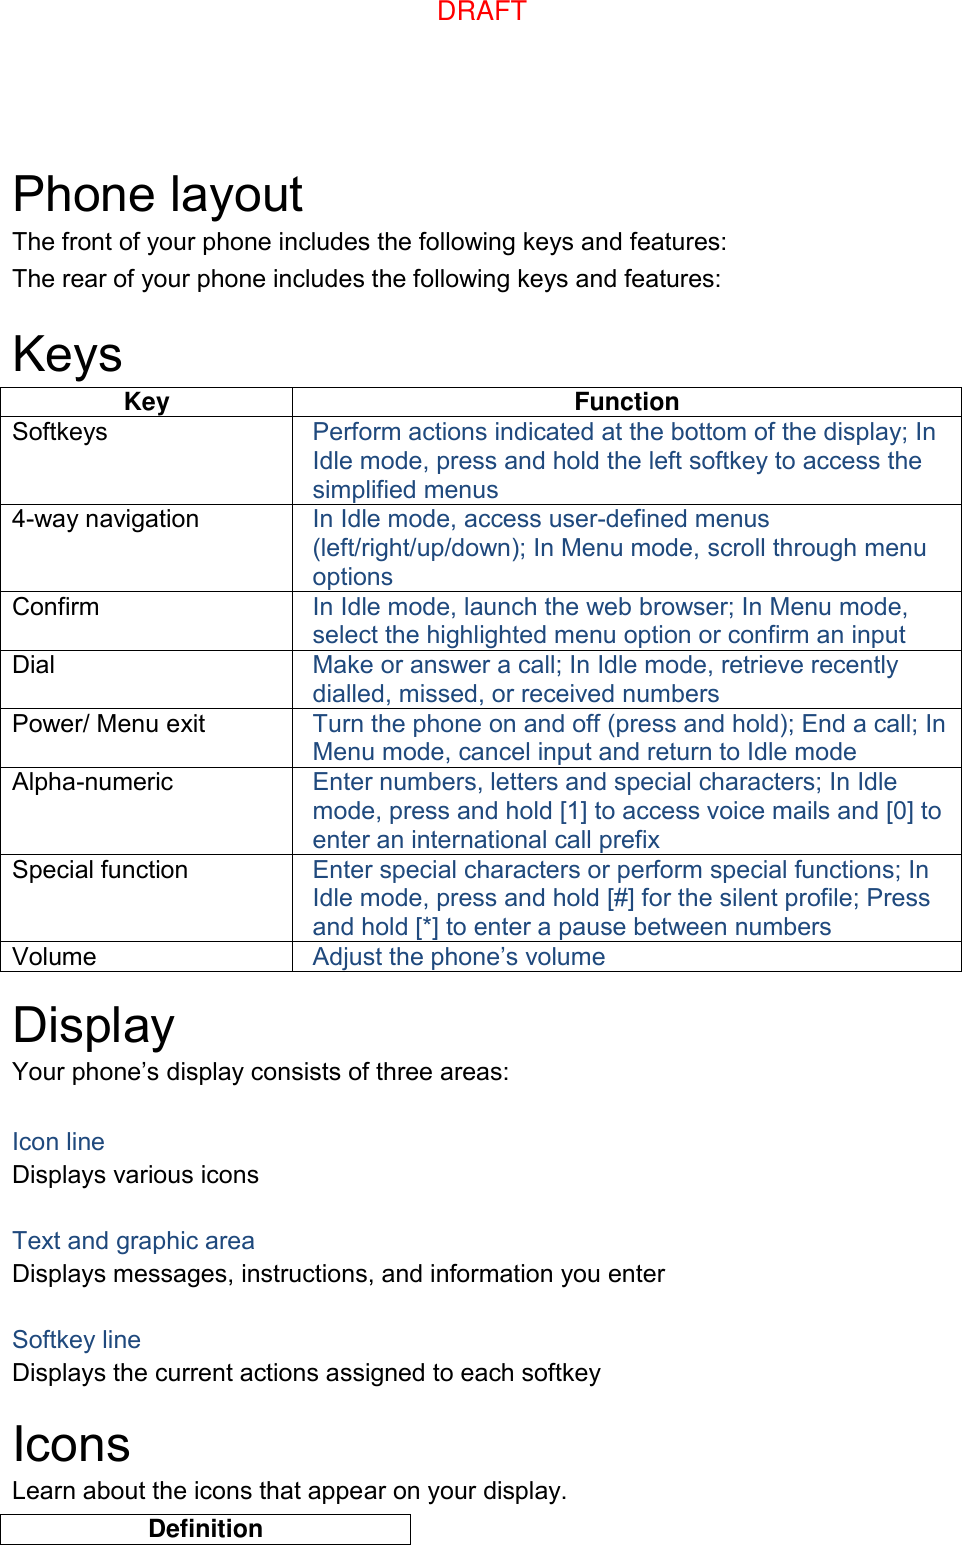  Phone layout The front of your phone includes the following keys and features: The rear of your phone includes the following keys and features:  Keys Key Function Softkeys Perform actions indicated at the bottom of the display; In Idle mode, press and hold the left softkey to access the simplified menus 4-way navigation In Idle mode, access user-defined menus (left/right/up/down); In Menu mode, scroll through menu options Confirm In Idle mode, launch the web browser; In Menu mode, select the highlighted menu option or confirm an input Dial Make or answer a call; In Idle mode, retrieve recently dialled, missed, or received numbers Power/ Menu exit Turn the phone on and off (press and hold); End a call; In Menu mode, cancel input and return to Idle mode Alpha-numeric Enter numbers, letters and special characters; In Idle mode, press and hold [1] to access voice mails and [0] to enter an international call prefix Special function Enter special characters or perform special functions; In Idle mode, press and hold [#] for the silent profile; Press and hold [*] to enter a pause between numbers Volume Adjust the phone’s volume  Display Your phone’s display consists of three areas:  Icon line Displays various icons  Text and graphic area Displays messages, instructions, and information you enter  Softkey line Displays the current actions assigned to each softkey  Icons Learn about the icons that appear on your display. Definition DRAFT